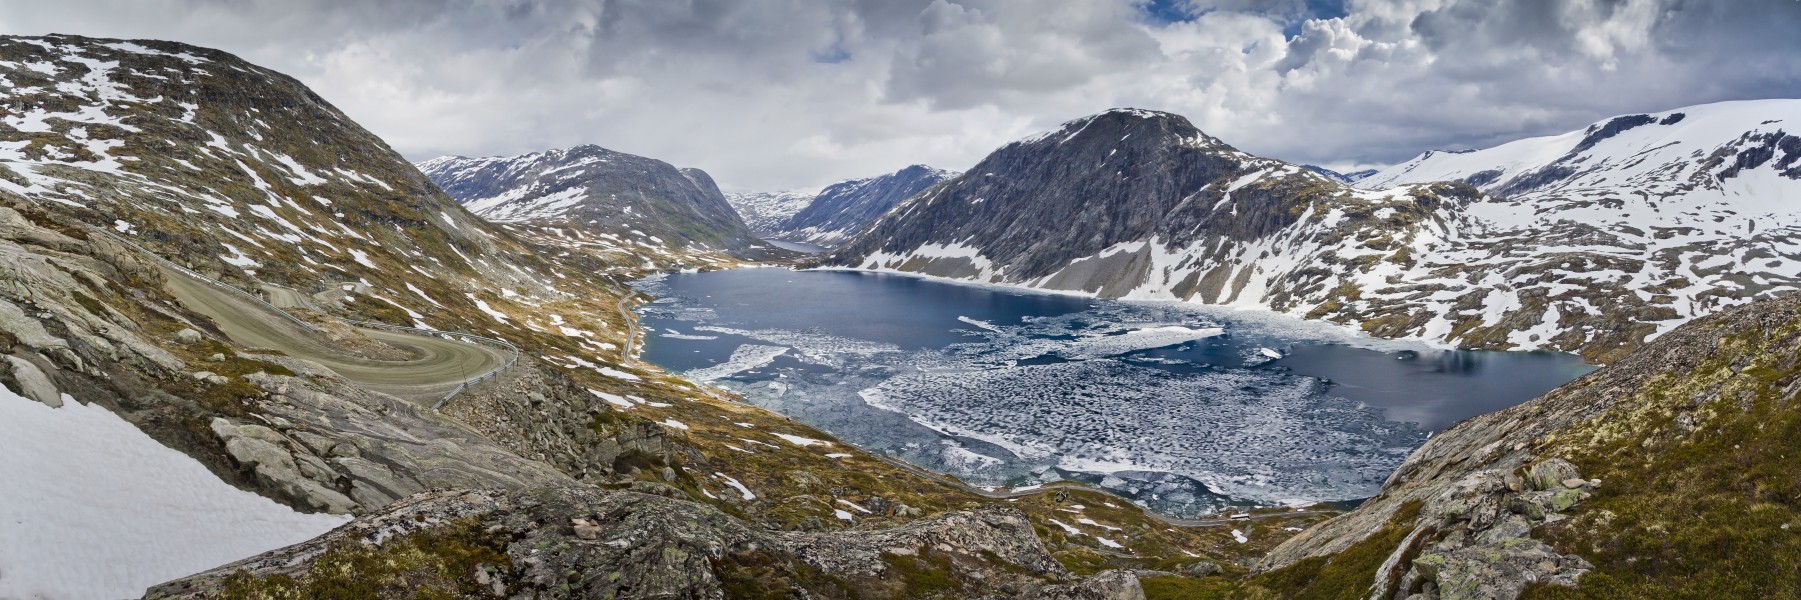 View to Icy Djupvatnet lake from the side of Dalsnibba mountain, 2013 June